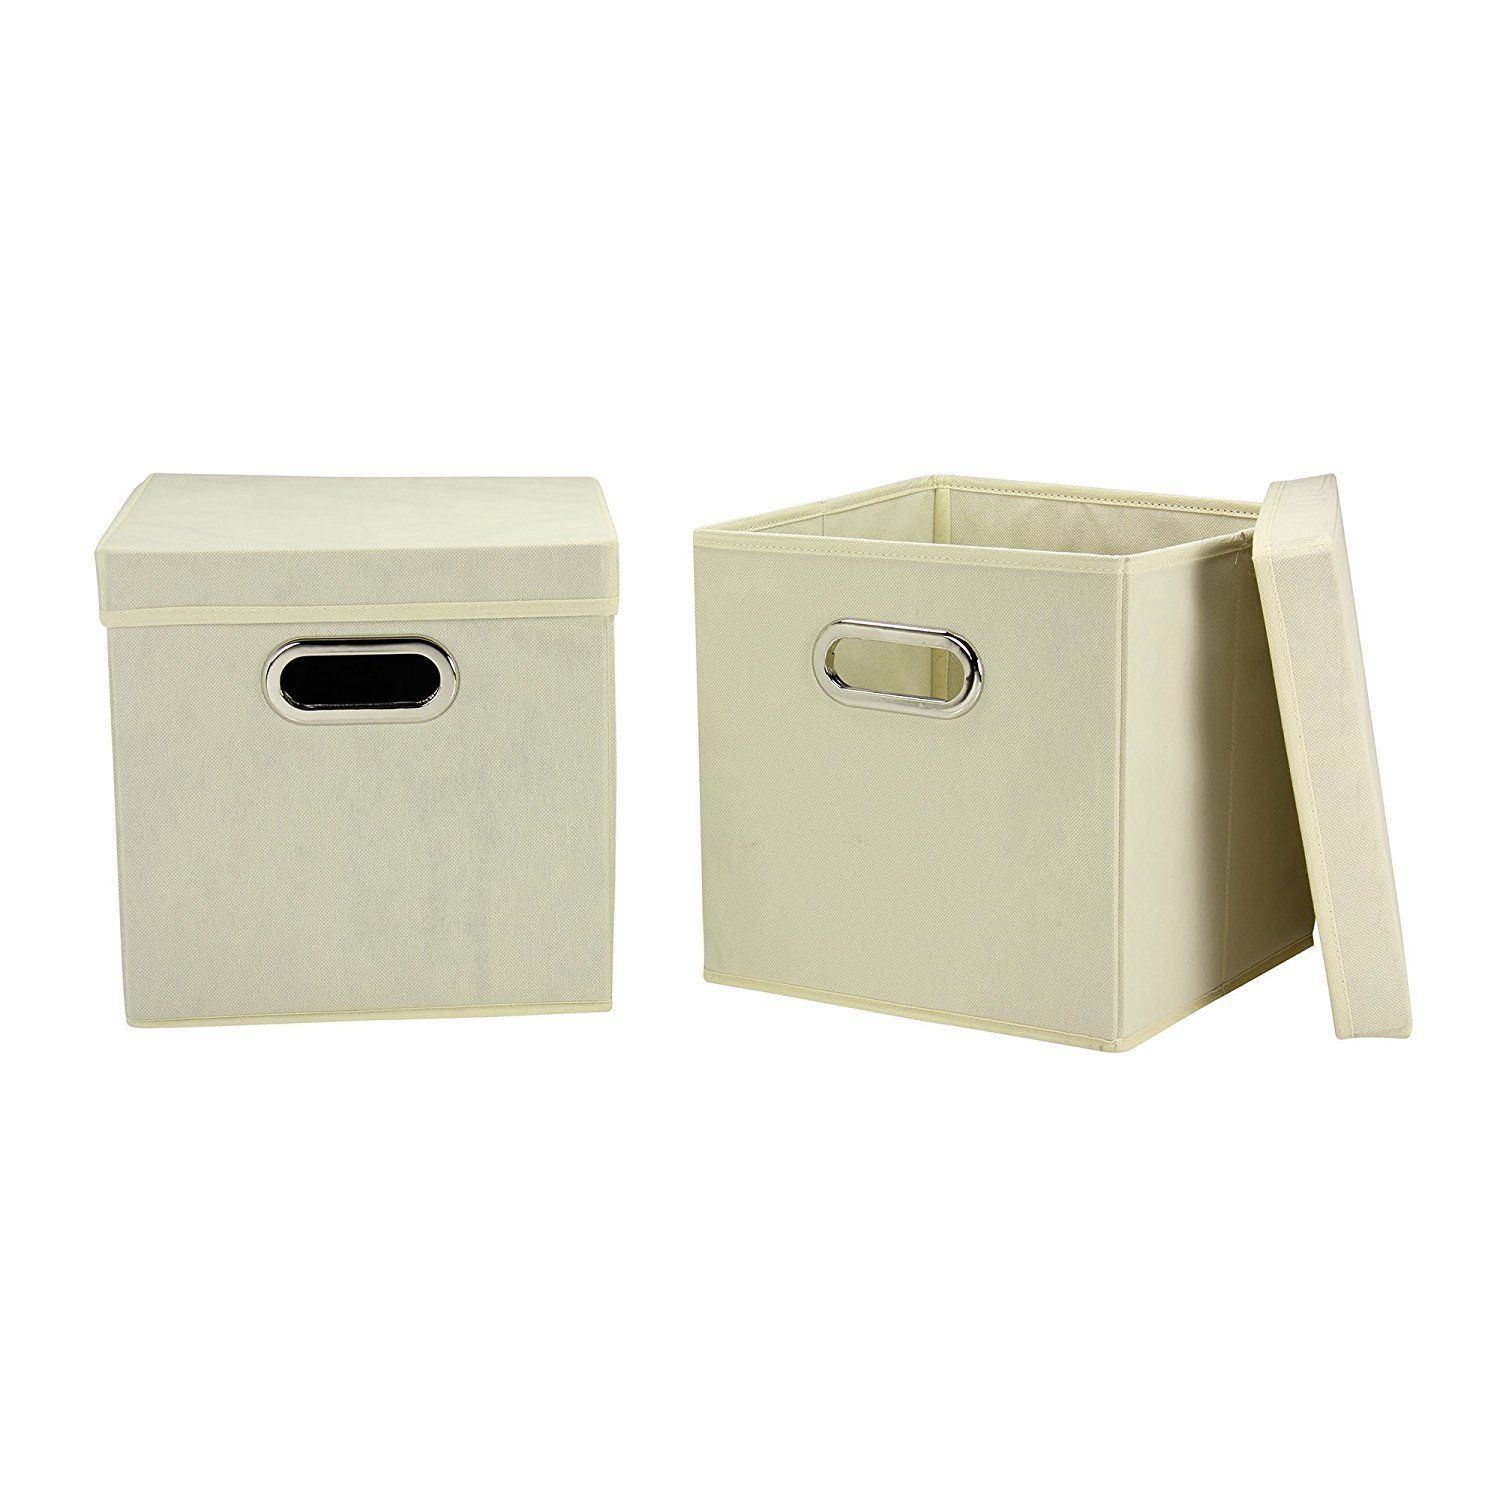 Natural Tan 11 Inch Storage Cubes Pack Of 2 11 X 11 X 11 Inches in measurements 1500 X 1500